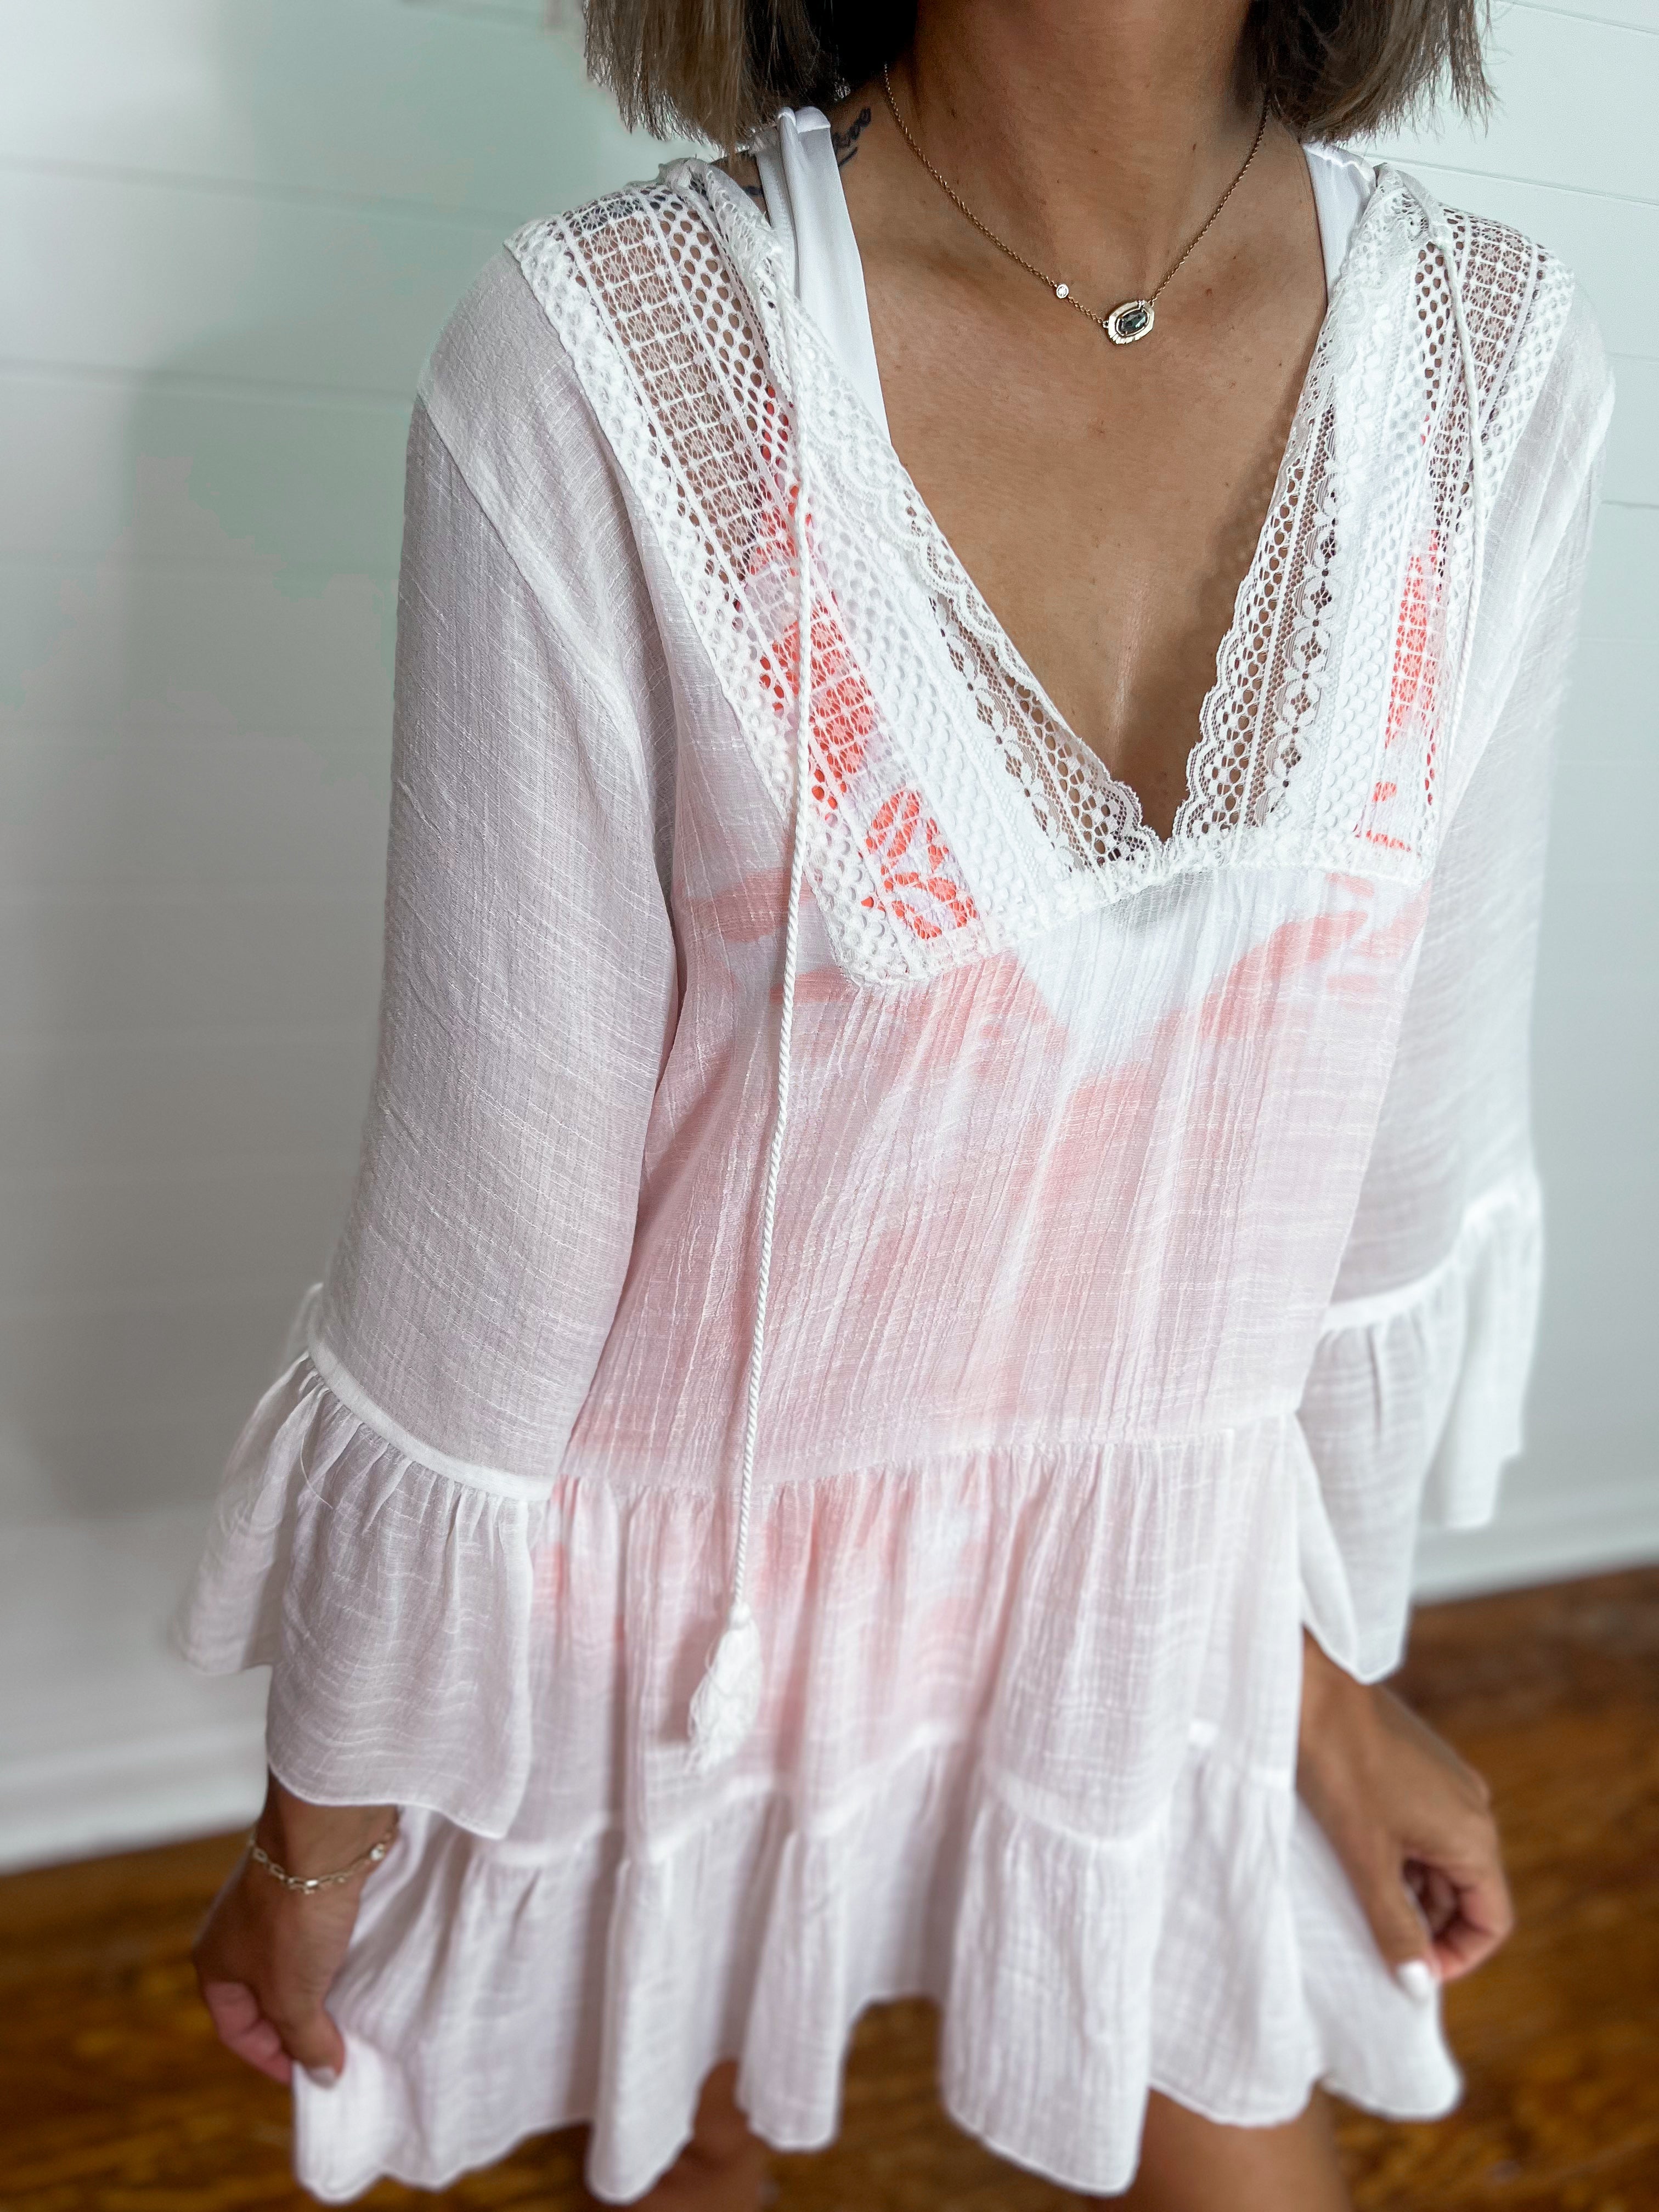 White Cover Up Dress